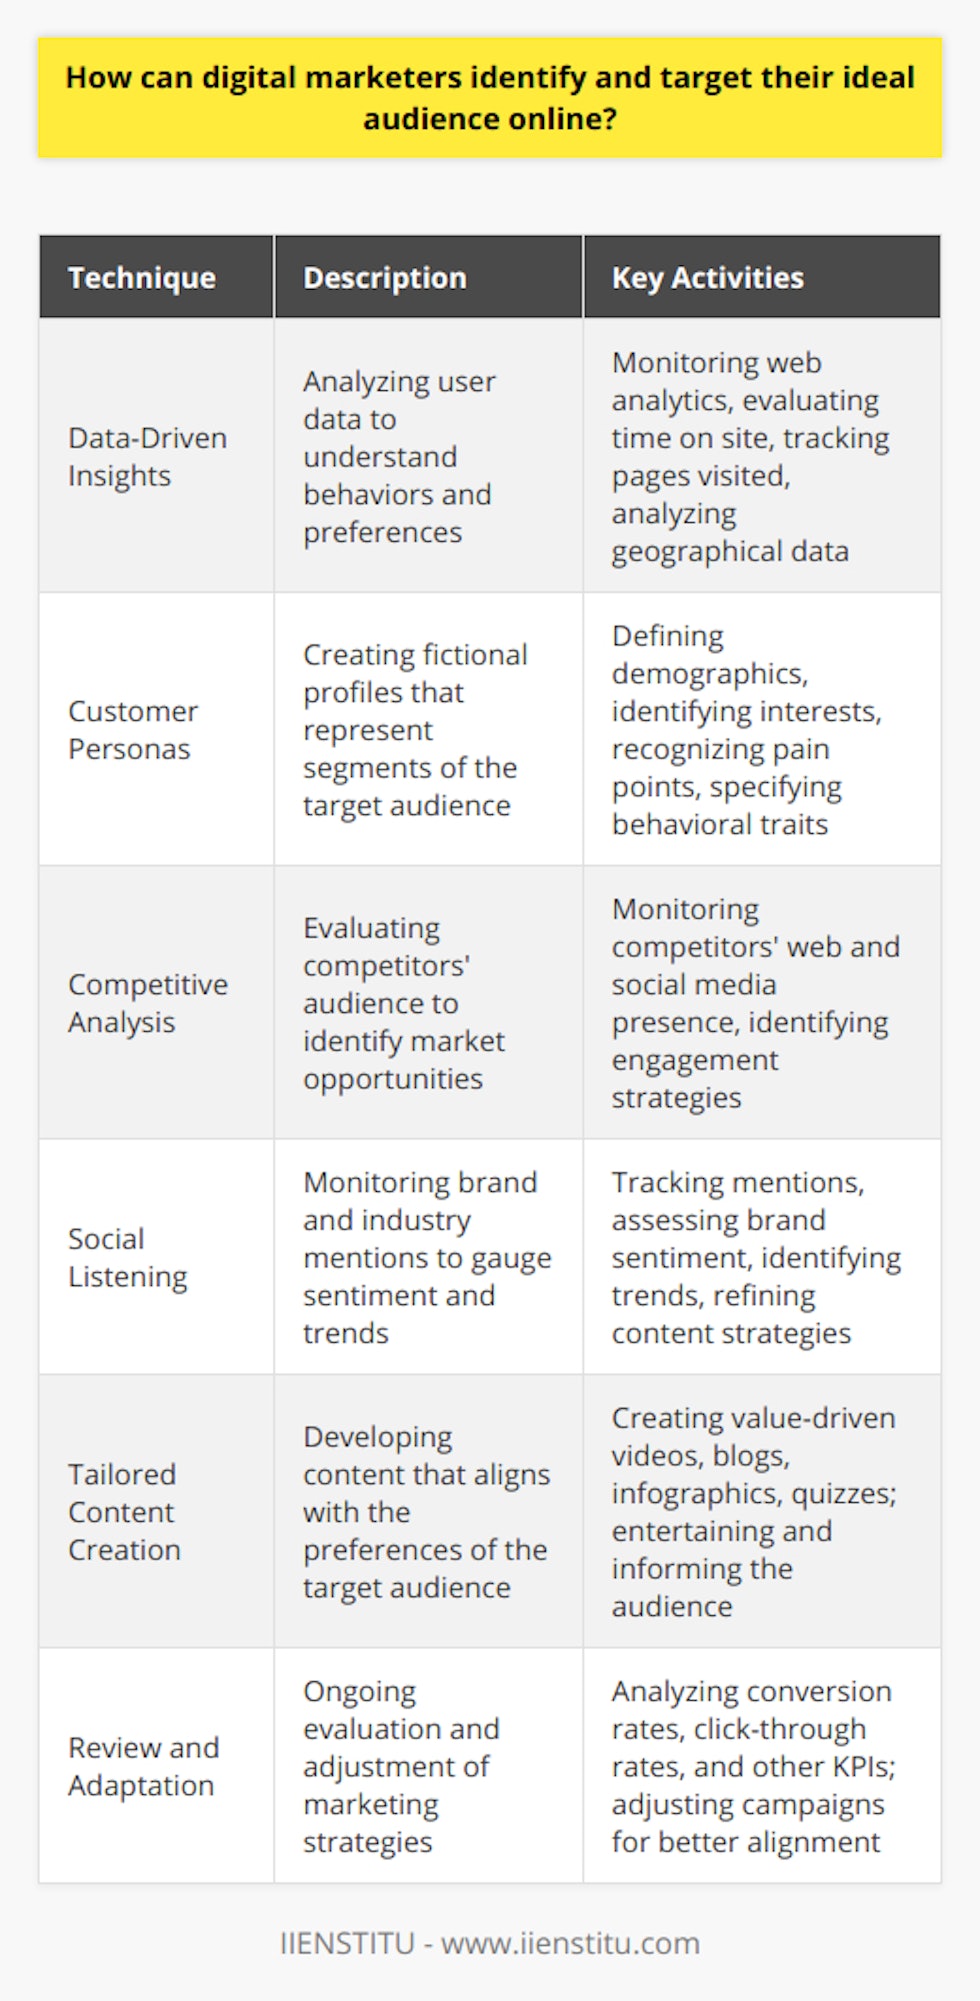 Identifying and targeting the ideal audience is the cornerstone of digital marketing. It's the process that enables brands to connect with the individuals most likely to purchase their products or services. Below, we explore various techniques that digital marketers can use to pinpoint and engage their perfect user base online.**Data-Driven Insights**Modern marketing is deeply rooted in data. Digital marketers start by analyzing data gathered from multiple sources, such as website analytics or user interactions on social media. This data provides insights into who is using a product or service and how they are engaging with it. Metrics such as time on site, pages visited, and geographical information are invaluable for understanding the demographics of an audience.**Understanding Customer Personas**Developing customer personas is another effective strategy. This involves creating fictional profiles that represent ideal customers. Each persona includes demographic details, personal interests, pain points, and behavioral traits. Crafting these personas helps marketers to empathize with their audience and tailor content and messages that resonate on a personal level.**Competitive Analysis**Observing and analyzing the audience of competitors can reveal gaps in the market or opportunities to differentiate oneself. Digital marketers can use tools to monitor competitors' web presence and social media activity to understand what works (or doesn't work) in engaging similar target audiences.**Social Listening**With social listening, brands monitor social channels for mentions of their brand, competitors, or industry-related terms. This real-time monitoring can reveal the sentiment around a brand or product and identify emerging trends that can guide marketing strategies. Listening to online conversations also helps in refining the content to address any concerns or leverage positive feedback.**Creating Tailored Content**Content creation is an art that involves understanding the language and media formats that an ideal audience prefers. Video content, blogs, infographics, or interactive quizzes are curated based on what is more likely to engage a particular group. The key is to create value-driven content that not only informs but also entertains, educating the audience and building trust in the brand.**Regular Review and Adaptation**No marketing strategy is set in stone. Continuous monitoring and fine-tuning are necessary to adapt to changing preferences and market conditions. Digital marketers need to evaluate the effectiveness of their targeting efforts through conversion rates, click-through rates, and other KPIs. This ongoing analysis helps in tweaking campaigns and strategies to ensure alignment with the ideal audience's expectations and interests.In essence, precisely identifying and engaging an online audience requires a blend of thorough analysis, creative strategy, and persistent refinement. Digital marketers who can successfully interpret data, understand consumer behavior, listen to the audience, and adapt accordingly, will build lasting relationships with their ideal consumers, leading to sustained success in the online marketplace.